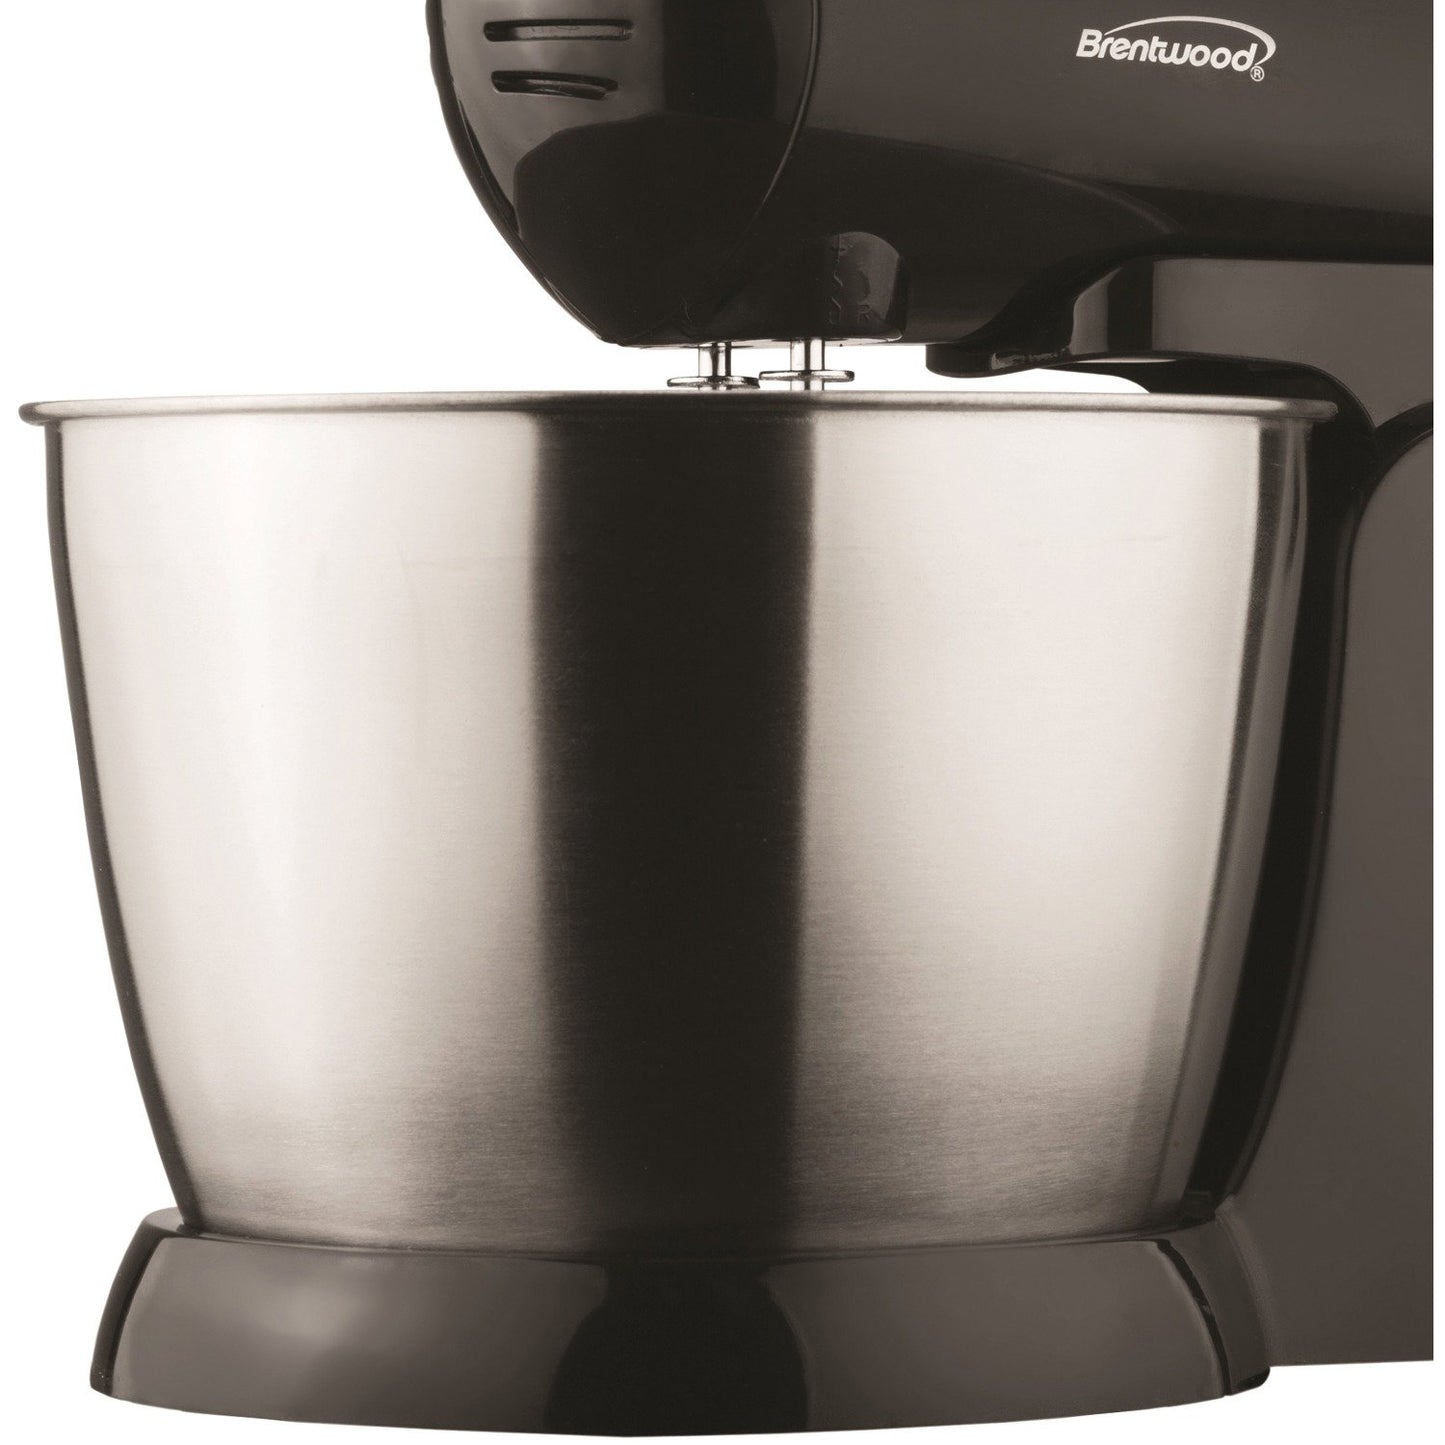 Brentwood Appliances SM-1153 5-Speed + Turbo Electric Stand Mixer w/Bowl